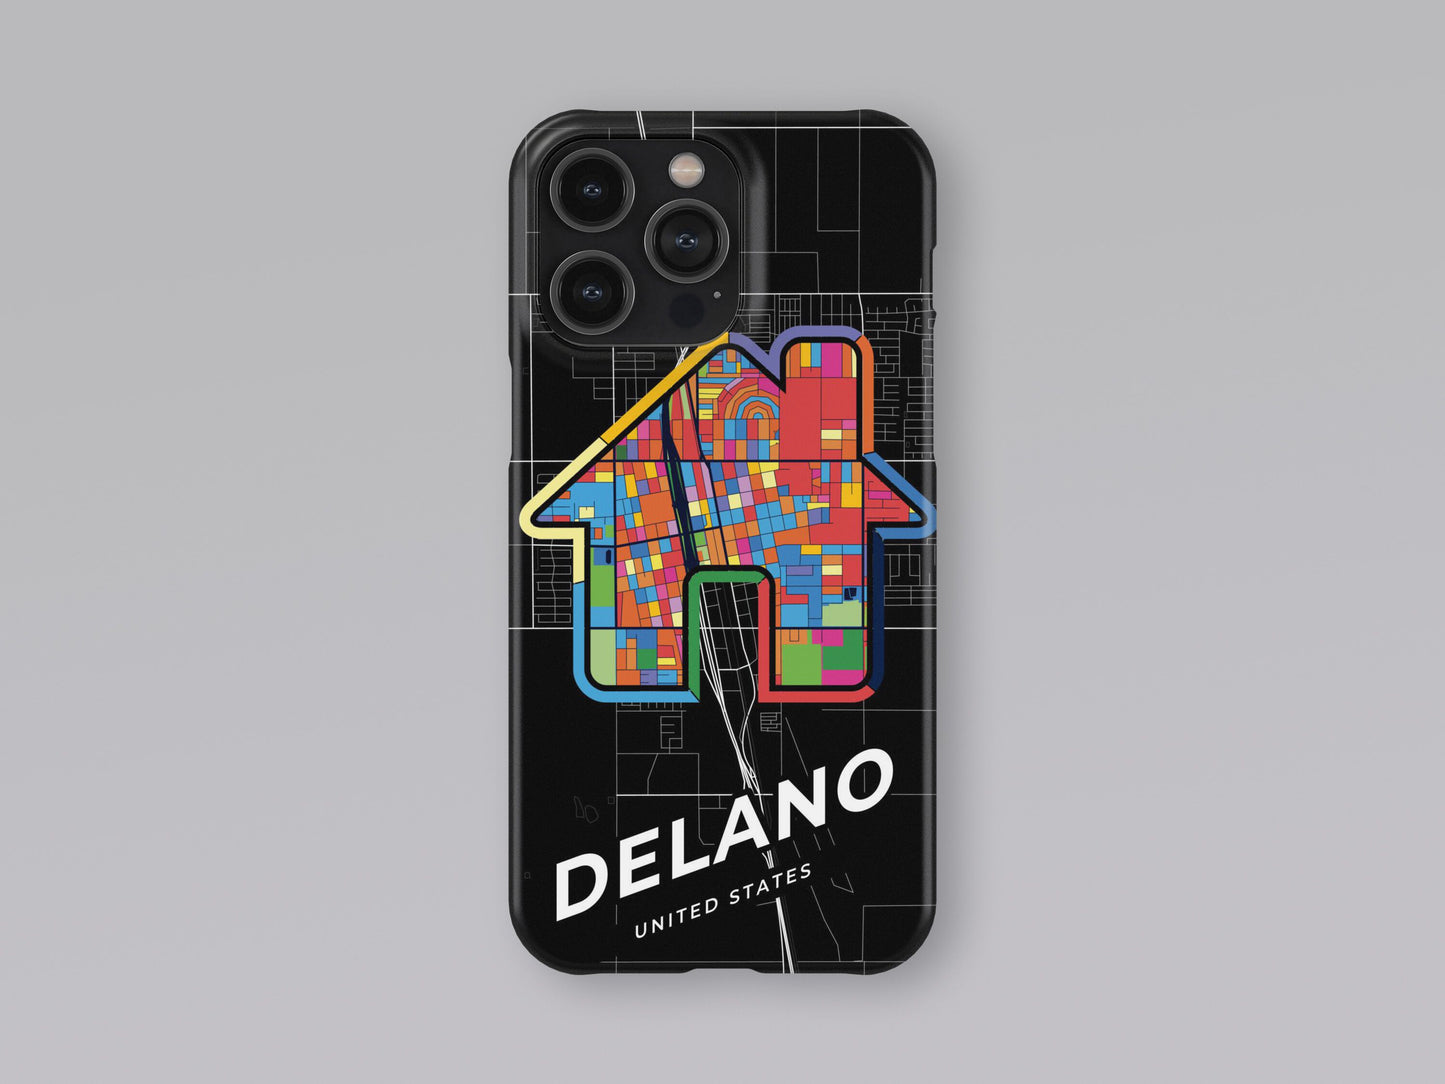 Delano California slim phone case with colorful icon. Birthday, wedding or housewarming gift. Couple match cases. 3